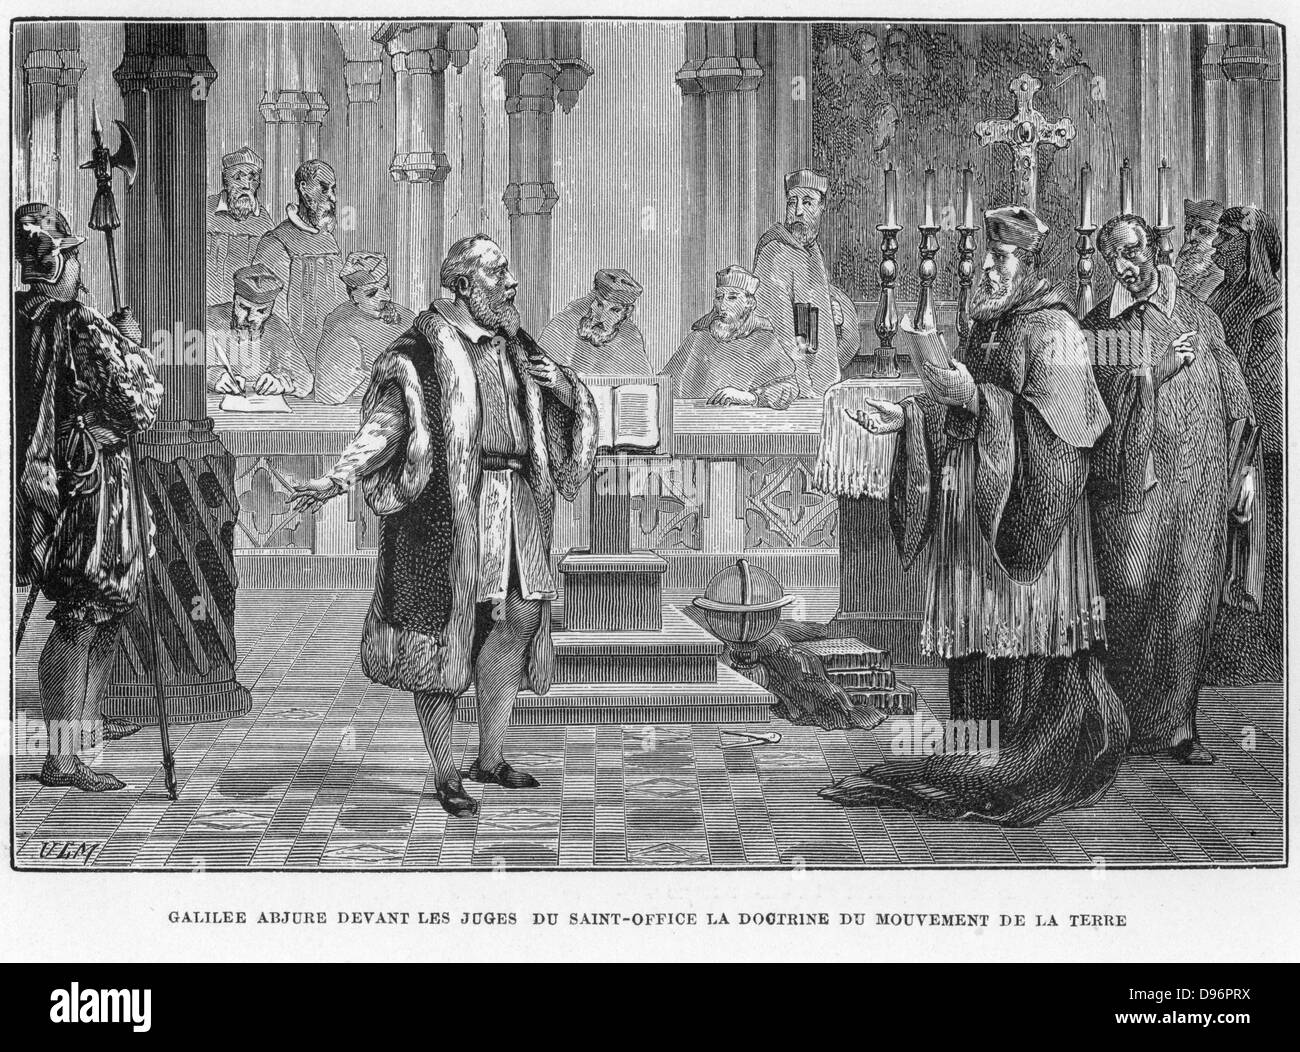 Galileo Galilei (1564-1642) Italian astronomer, mathematician and physicist.   Here he is facing the Inquisition, who challenged his claim that the earth moves, thus contradicting the theories of Aristotle. From 'Vies des Savants Illustres' by Louis Figuier. (Paris, 1870). Engraving. Stock Photo